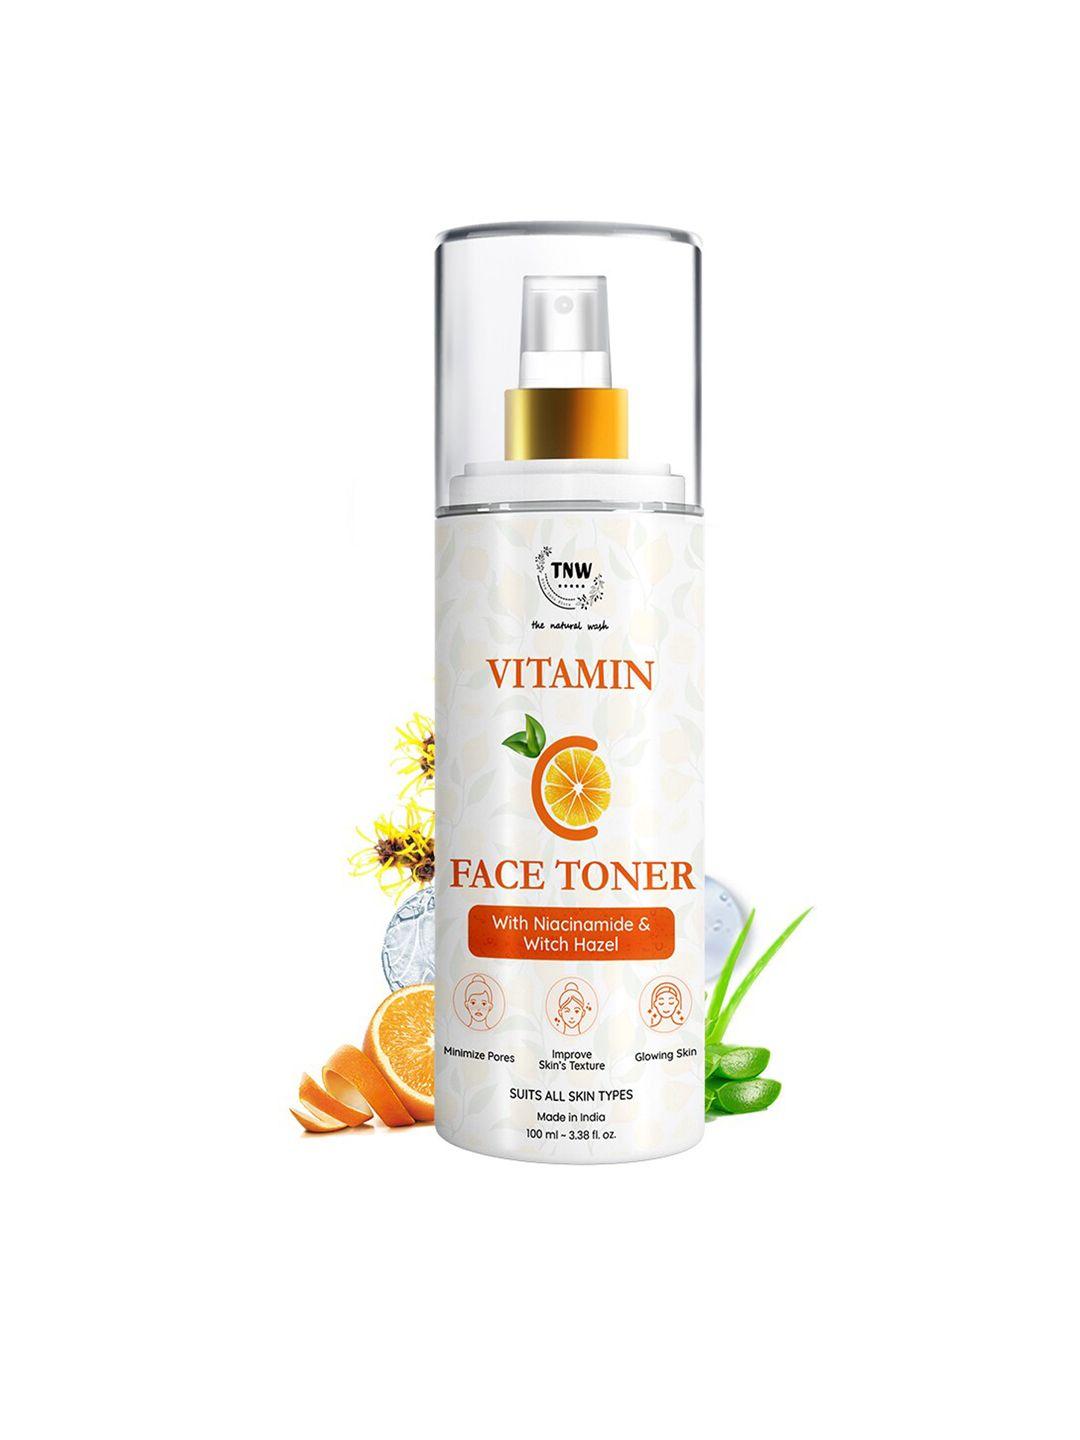 tnw the natural wash vitamin c face toner with niacinamide & witch hazel - 100 ml